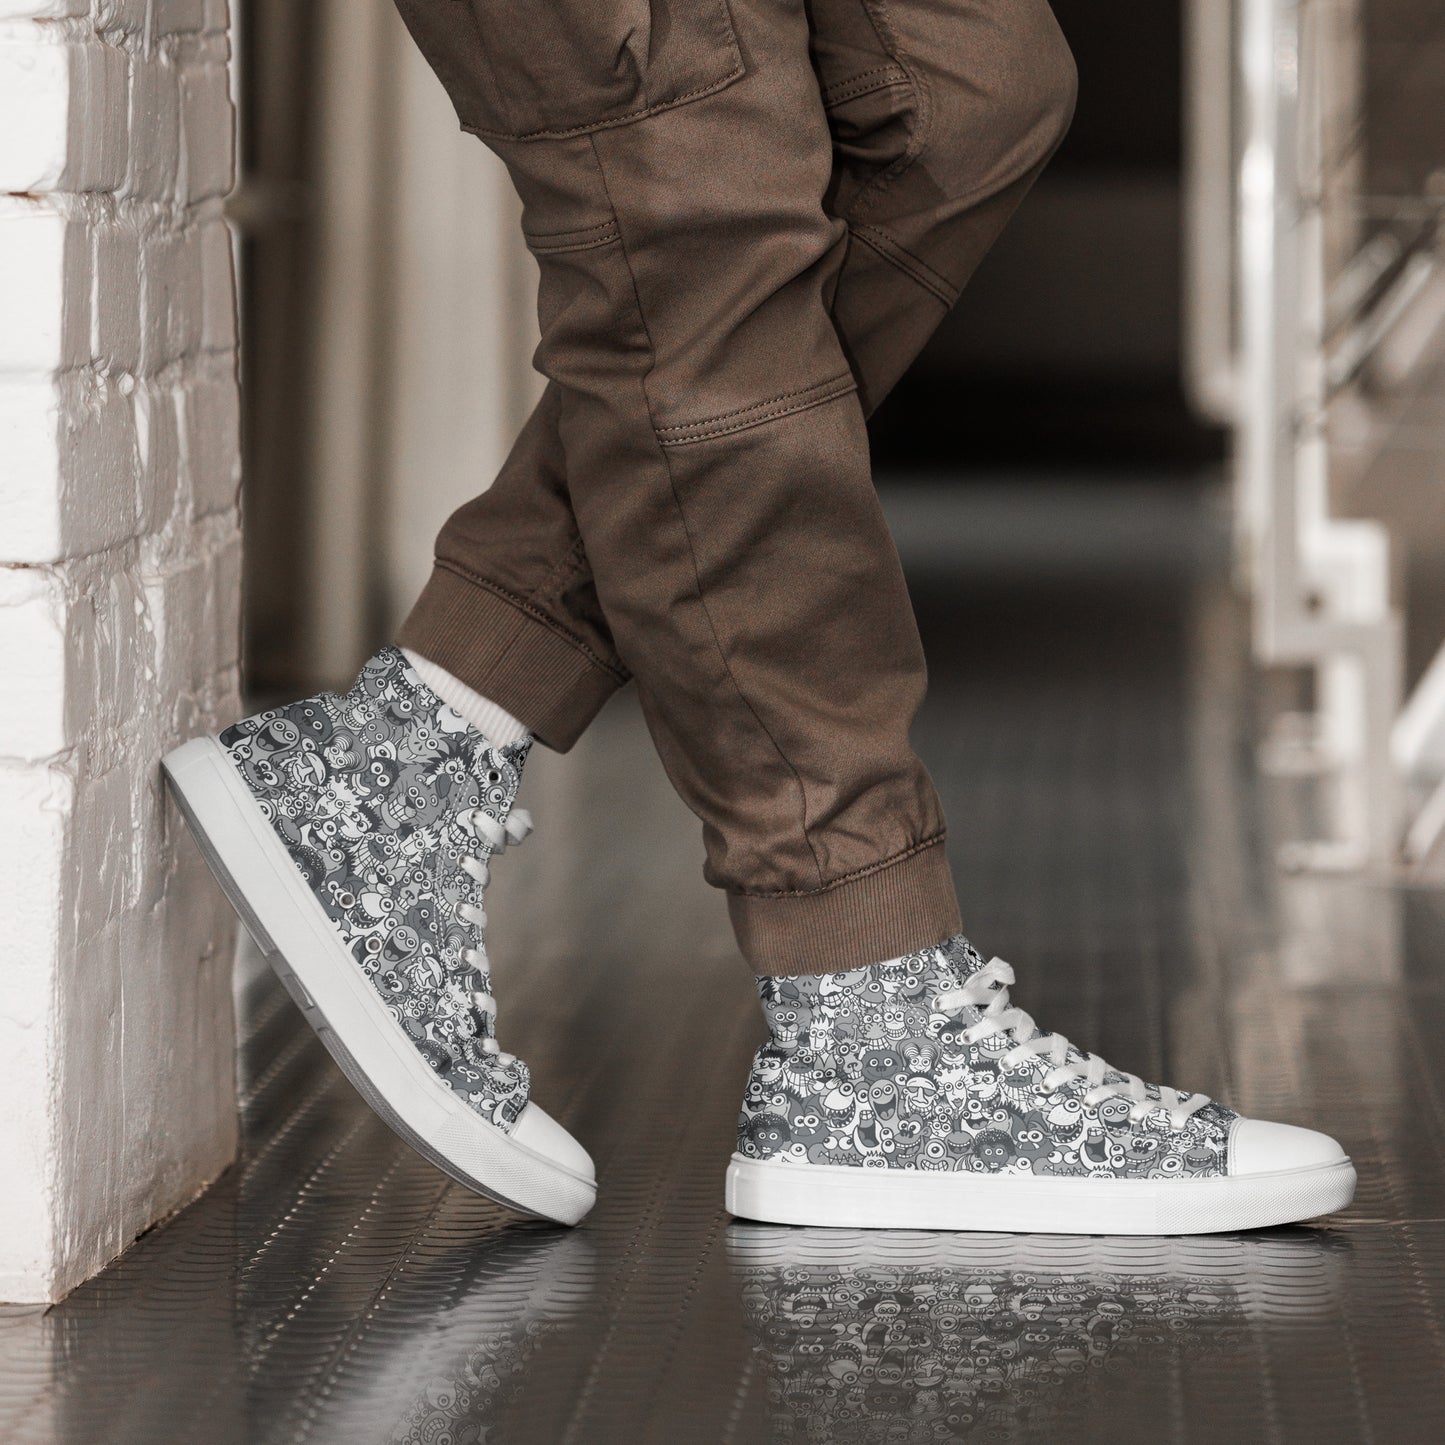 Find the gray man in the gray crowd of this gray world Men’s high top canvas shoes. Lifestyle